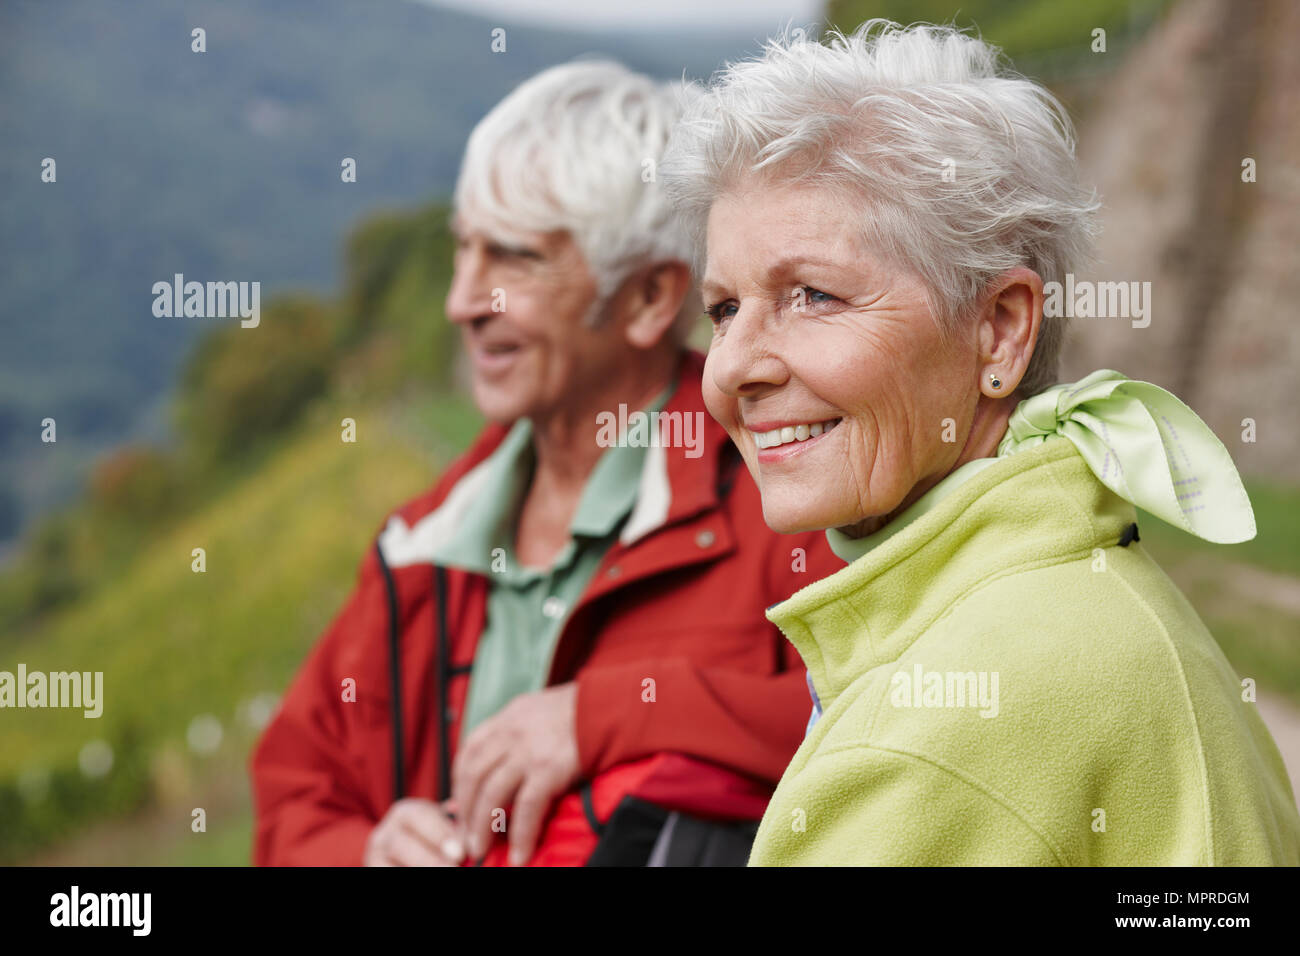 Portrait of happy senior woman with partner in thew background Stock Photo